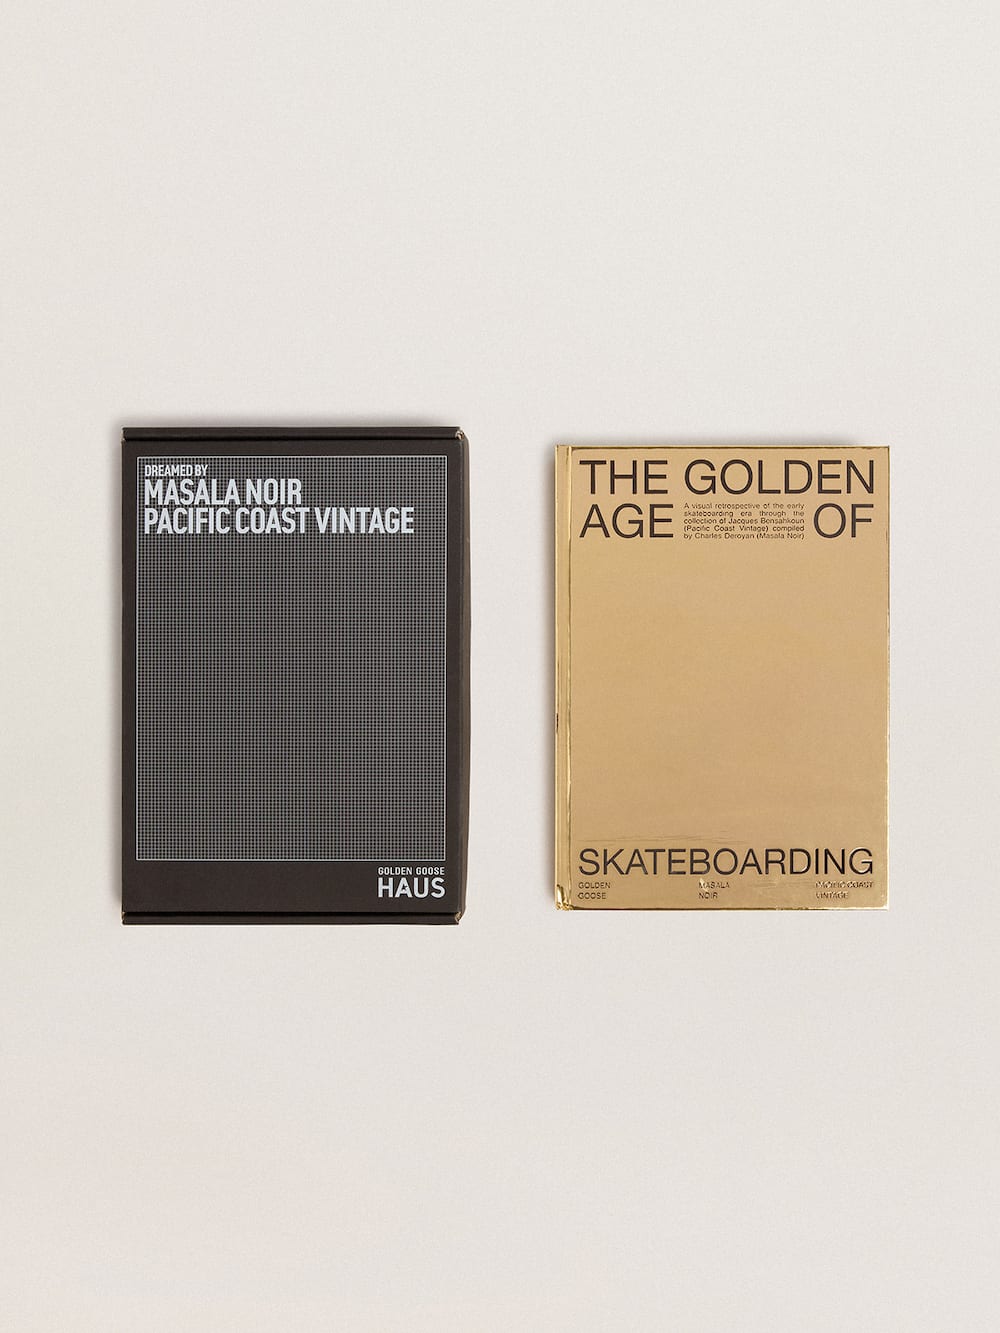 Golden Goose - „The Golden age of Skateboarding“ Dreamed by Pacific Coast Vintage and Masala Noir exklusiv von HAUS of Dreamers in 